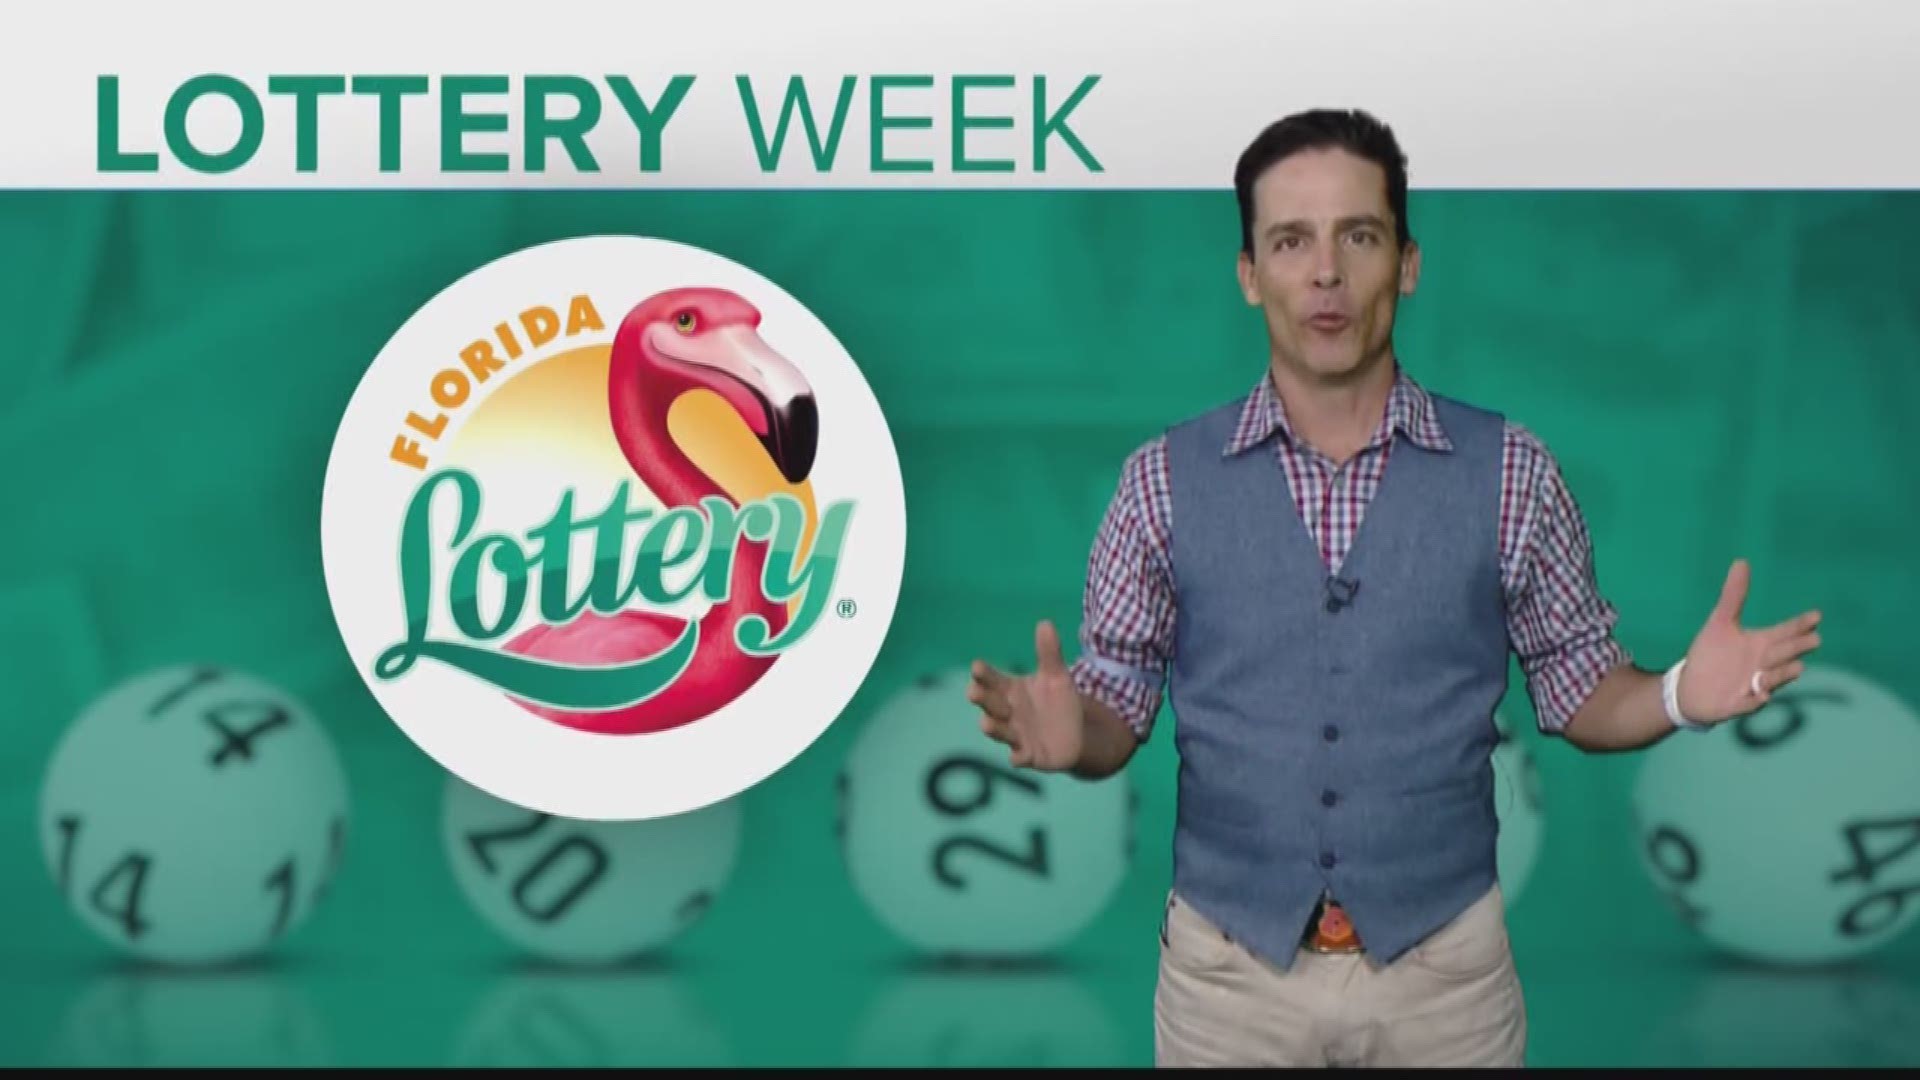 Learn more about what the Florida Lottery does and how you can be apart of the National Lottery Week celebrations.